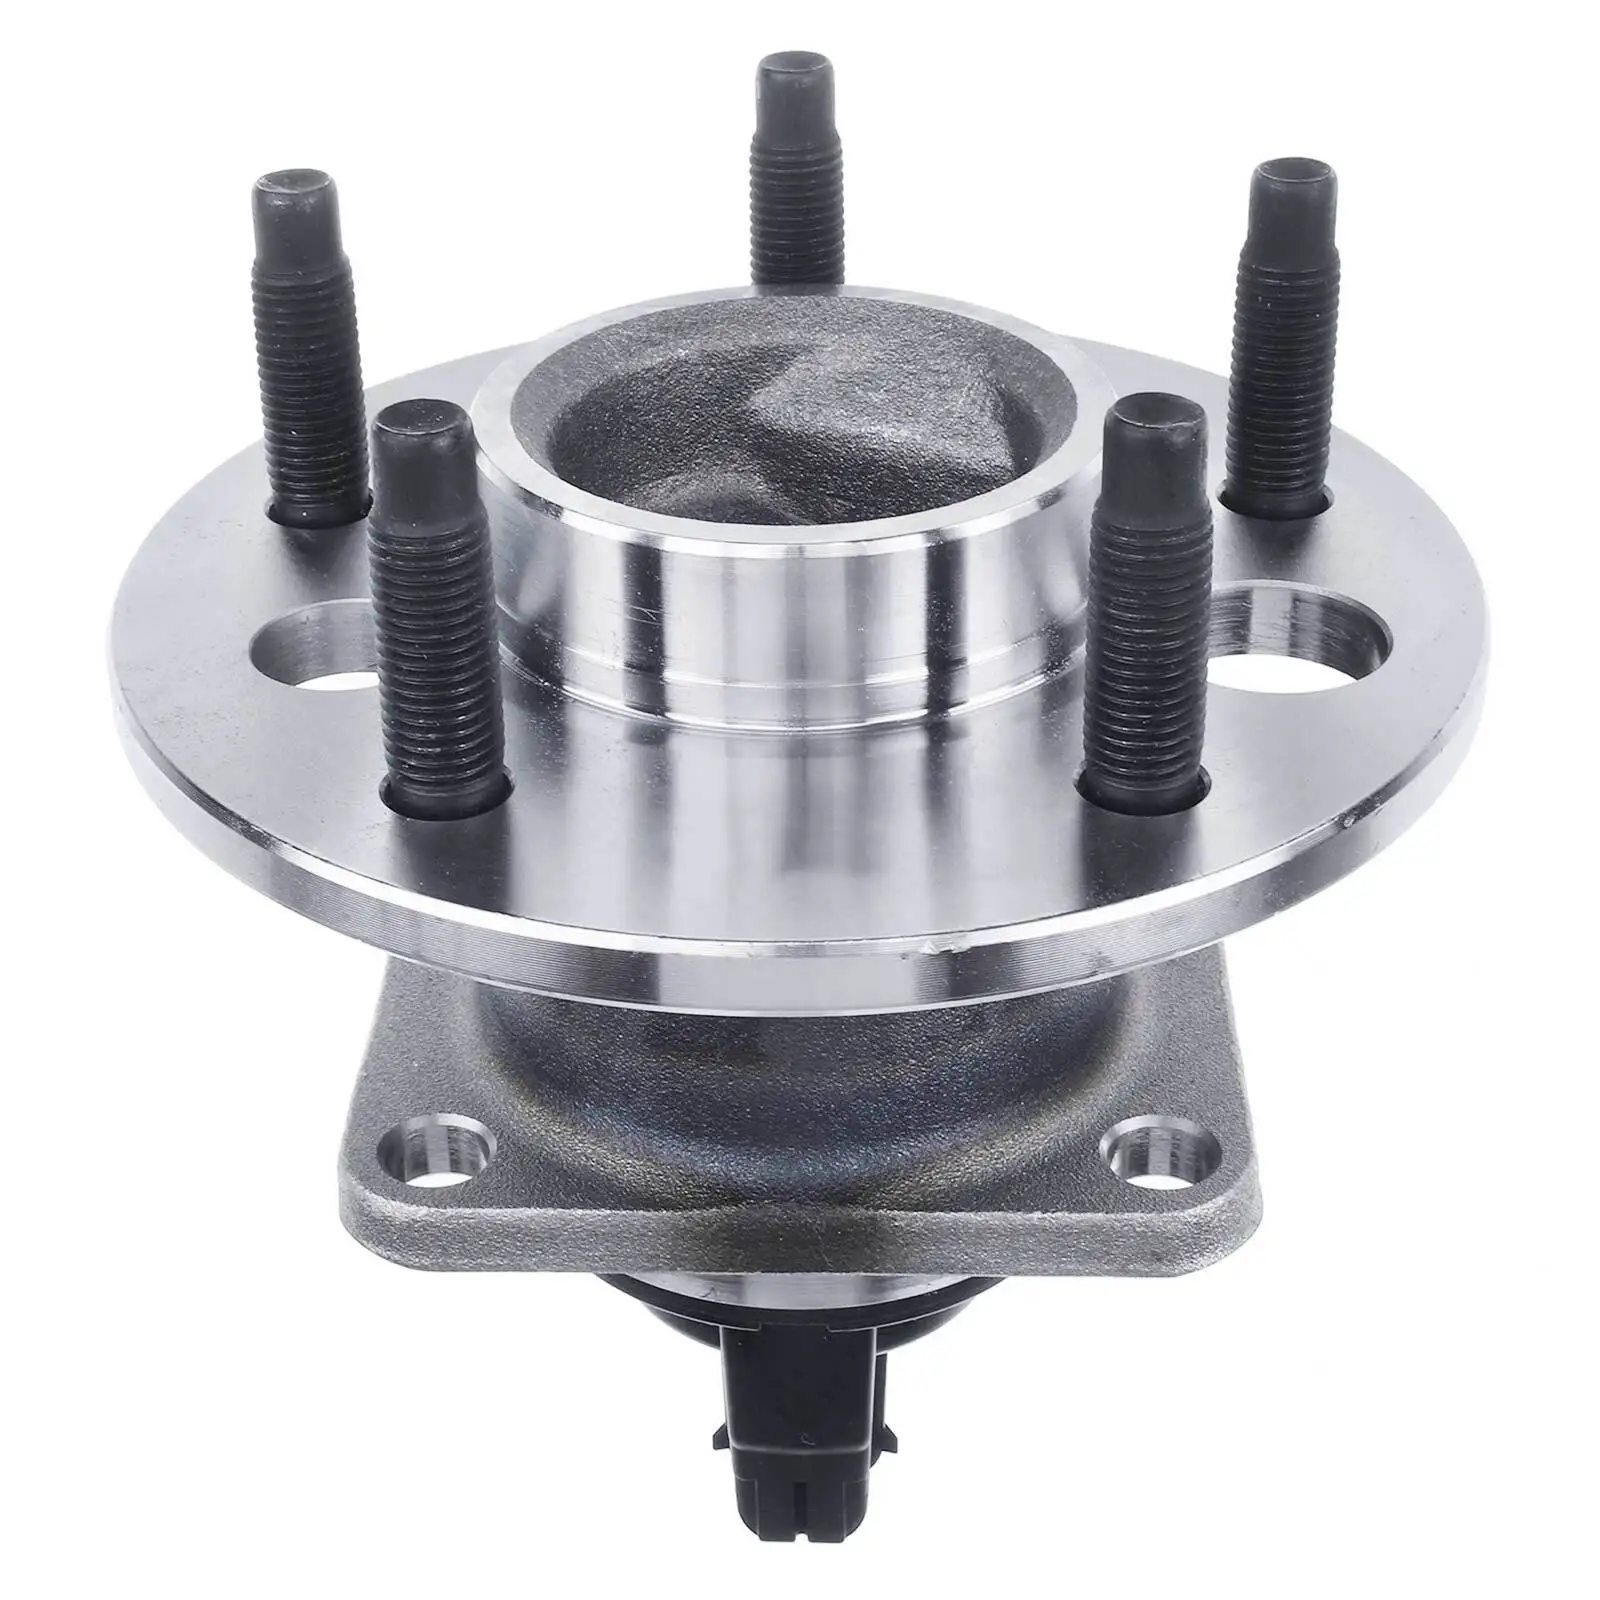 

A3 Wholesales Rear Left / Right Wheel Bearing Hub Assembly for Buick Lucerne Lesabre Cadillac Deville